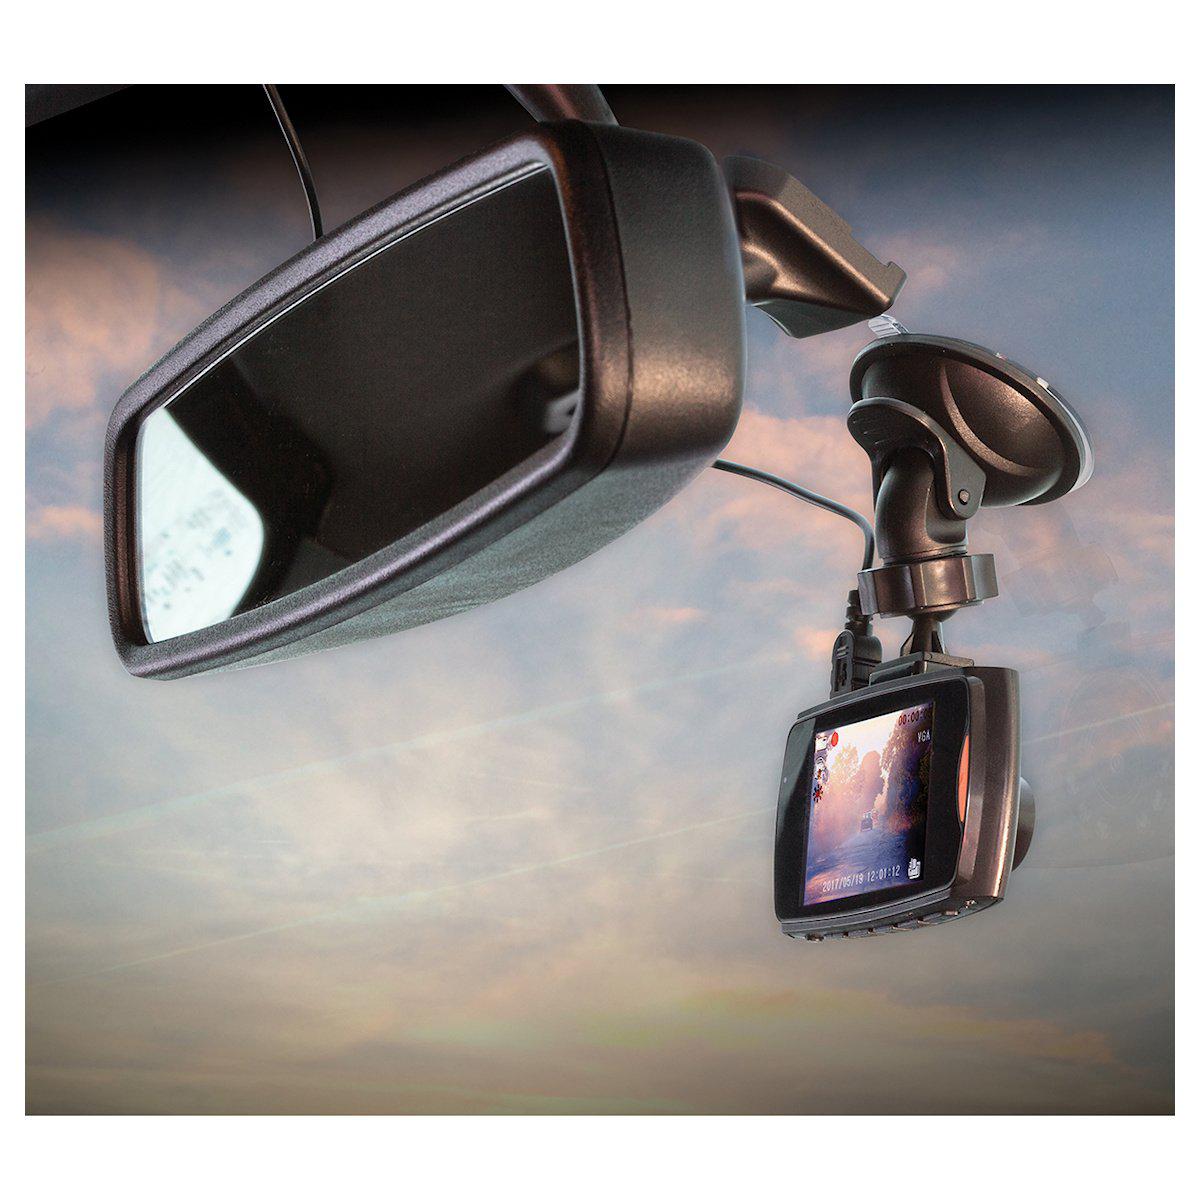 Goodyear 1080P Dual Lens Car DVR Front and Rear Camera Video Dash